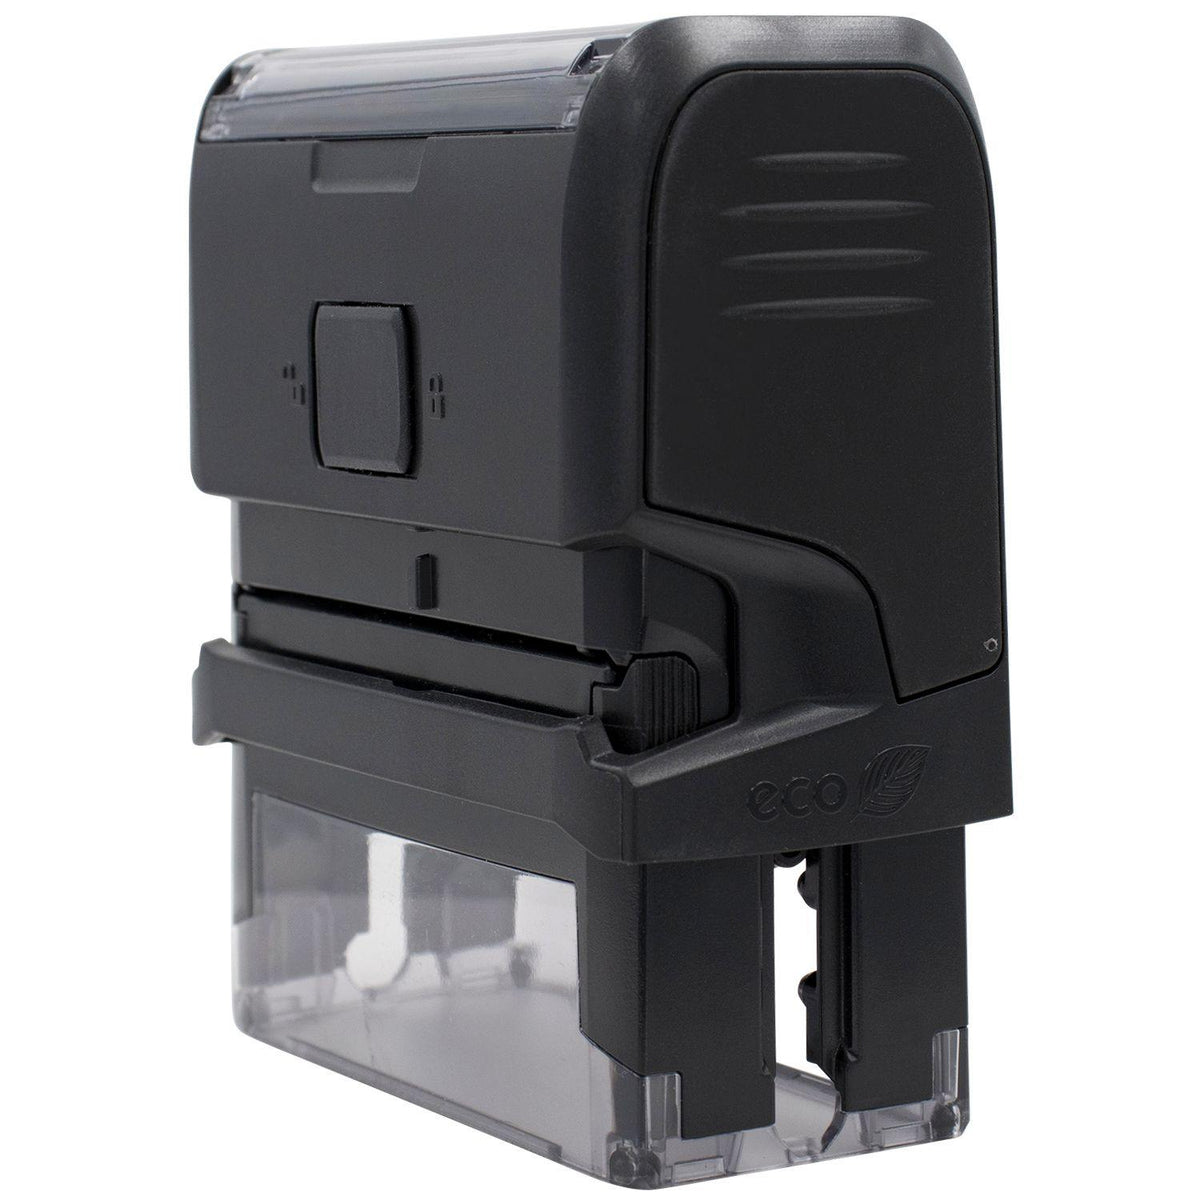 Self-Inking Bold Allergies Stamp - Engineer Seal Stamps - Brand_Trodat, Impression Size_Small, Stamp Type_Self-Inking Stamp, Type of Use_Medical Office